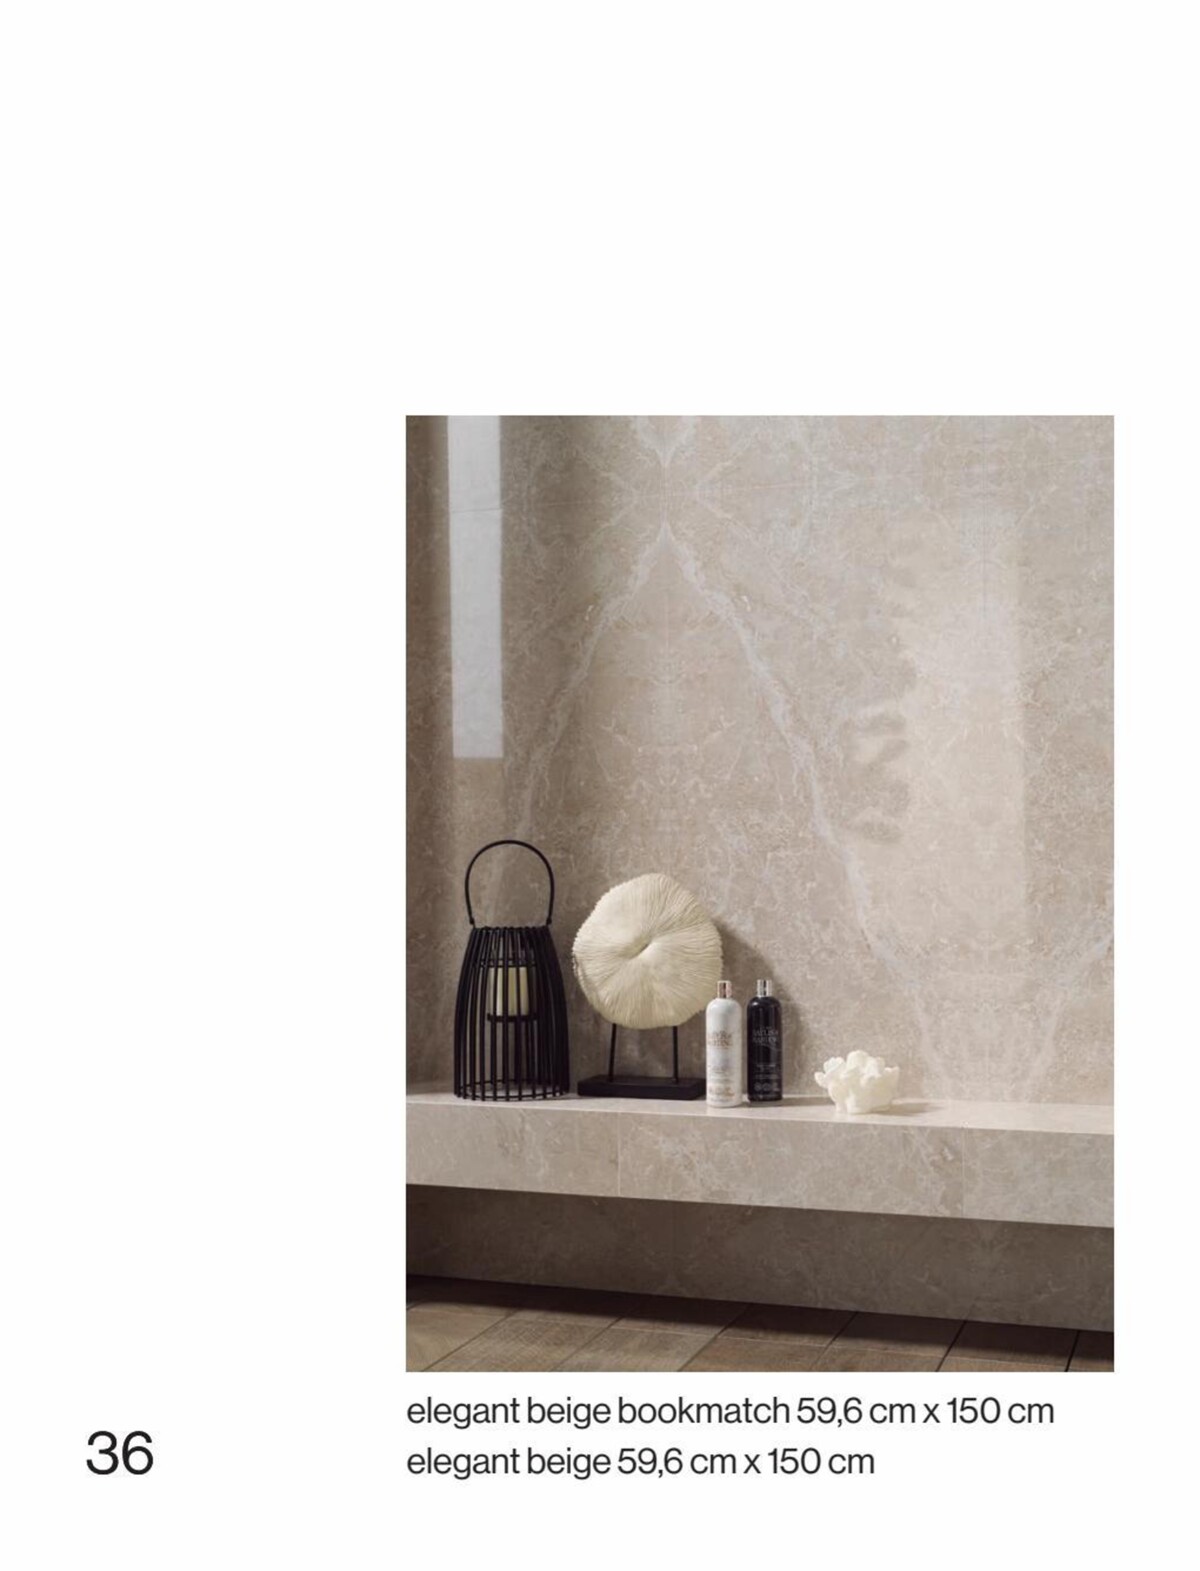 Catalogue MARMI,a ceramic tile that echoes the purity of marble, page 00036